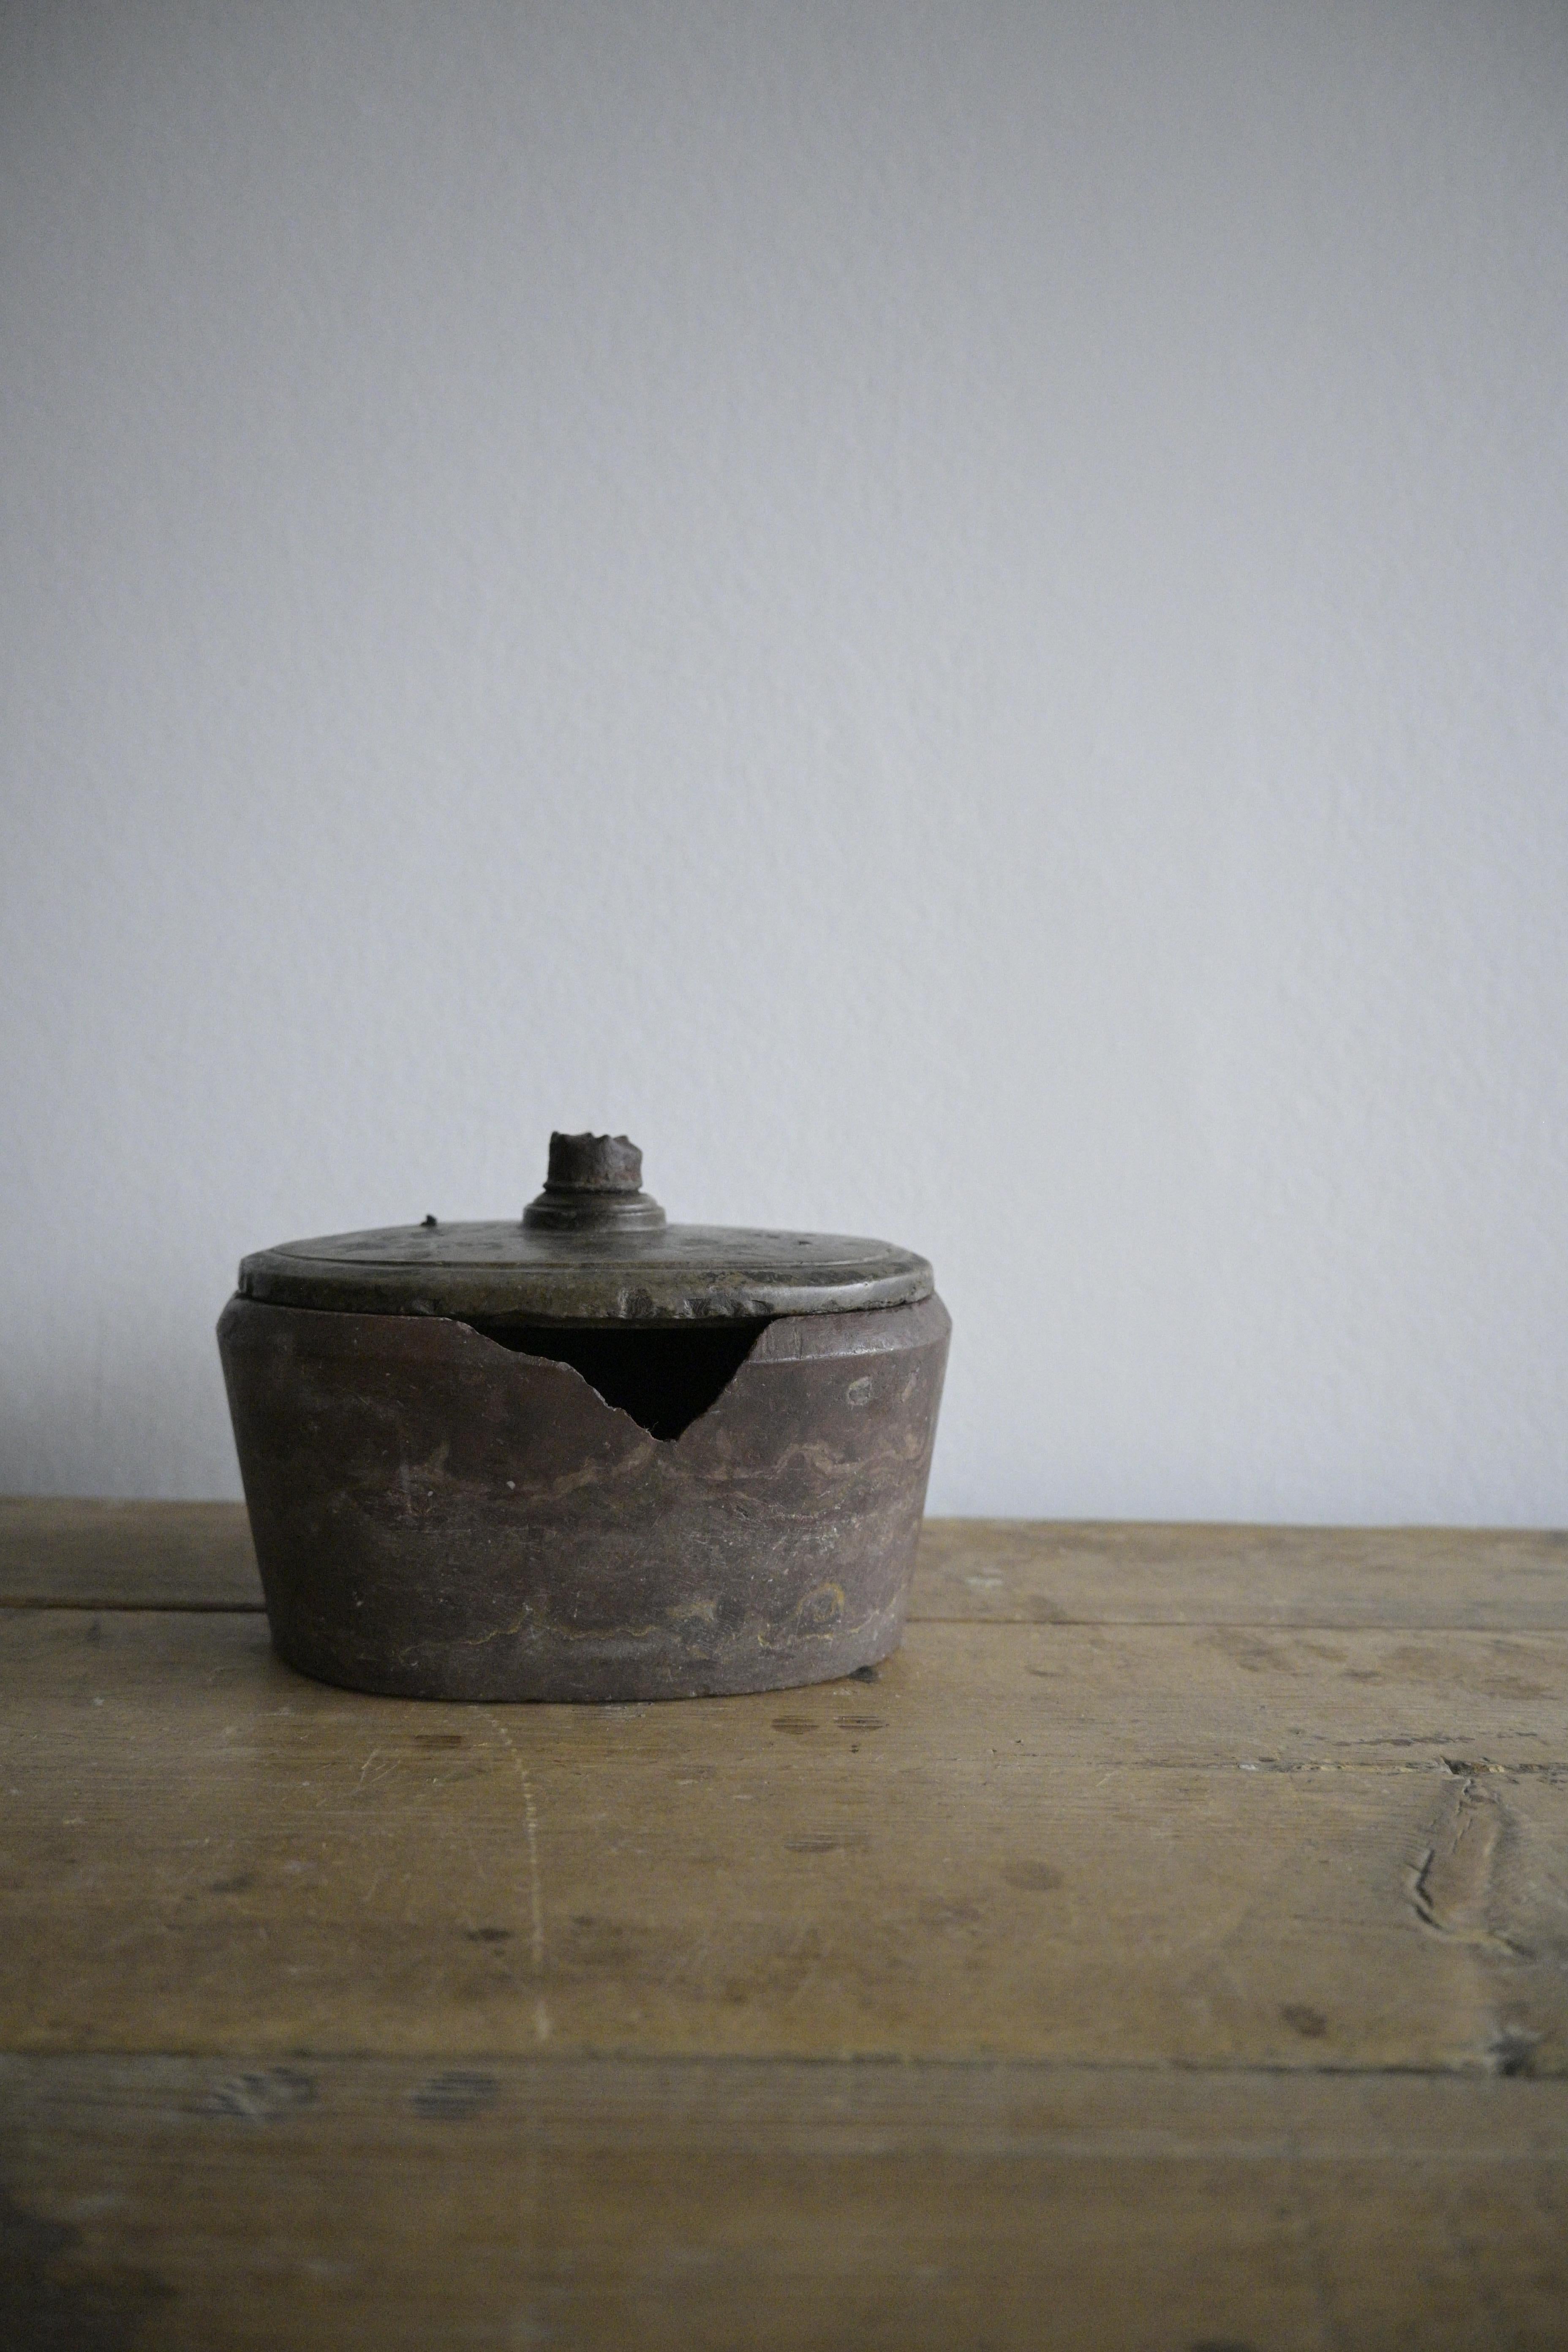 Swedish Butter Box ca 1850

The base part is made of grey Öland limestone and the lid is made of red Öland limestone.

Heigth: 10 cm/3.9 inch
Depth: 11.5 cm/4.5 inch
Widht: 15 cm/5.9 inch